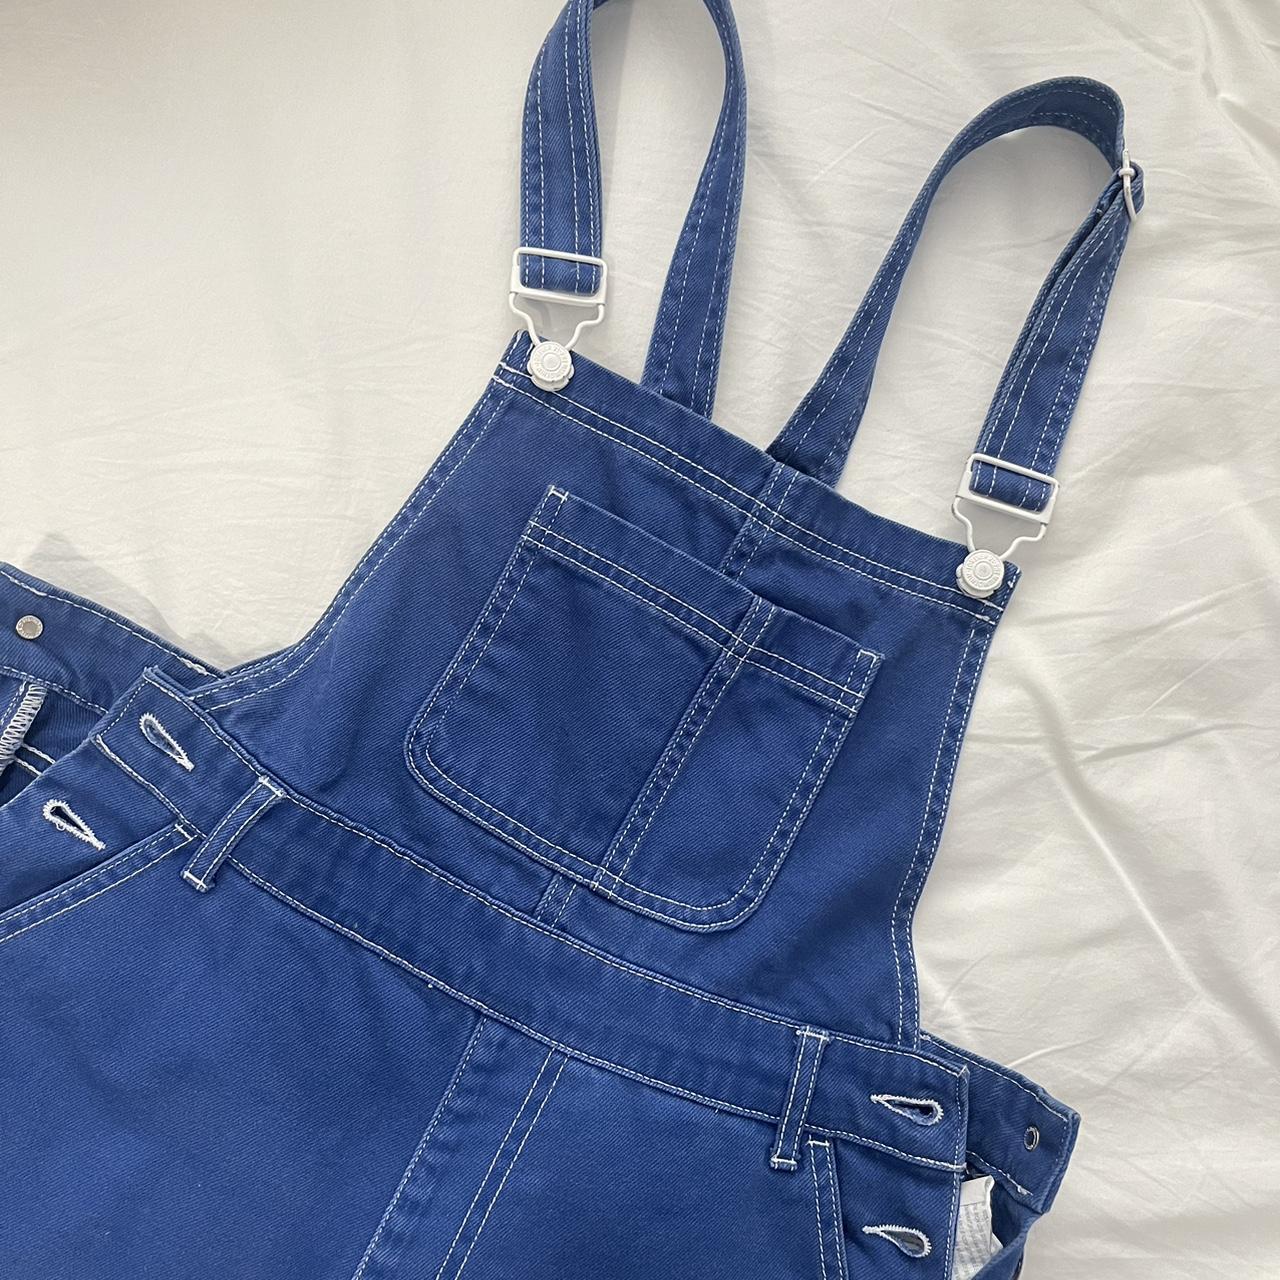 Forever 21 Women's Blue and Black Dungarees-overalls | Depop